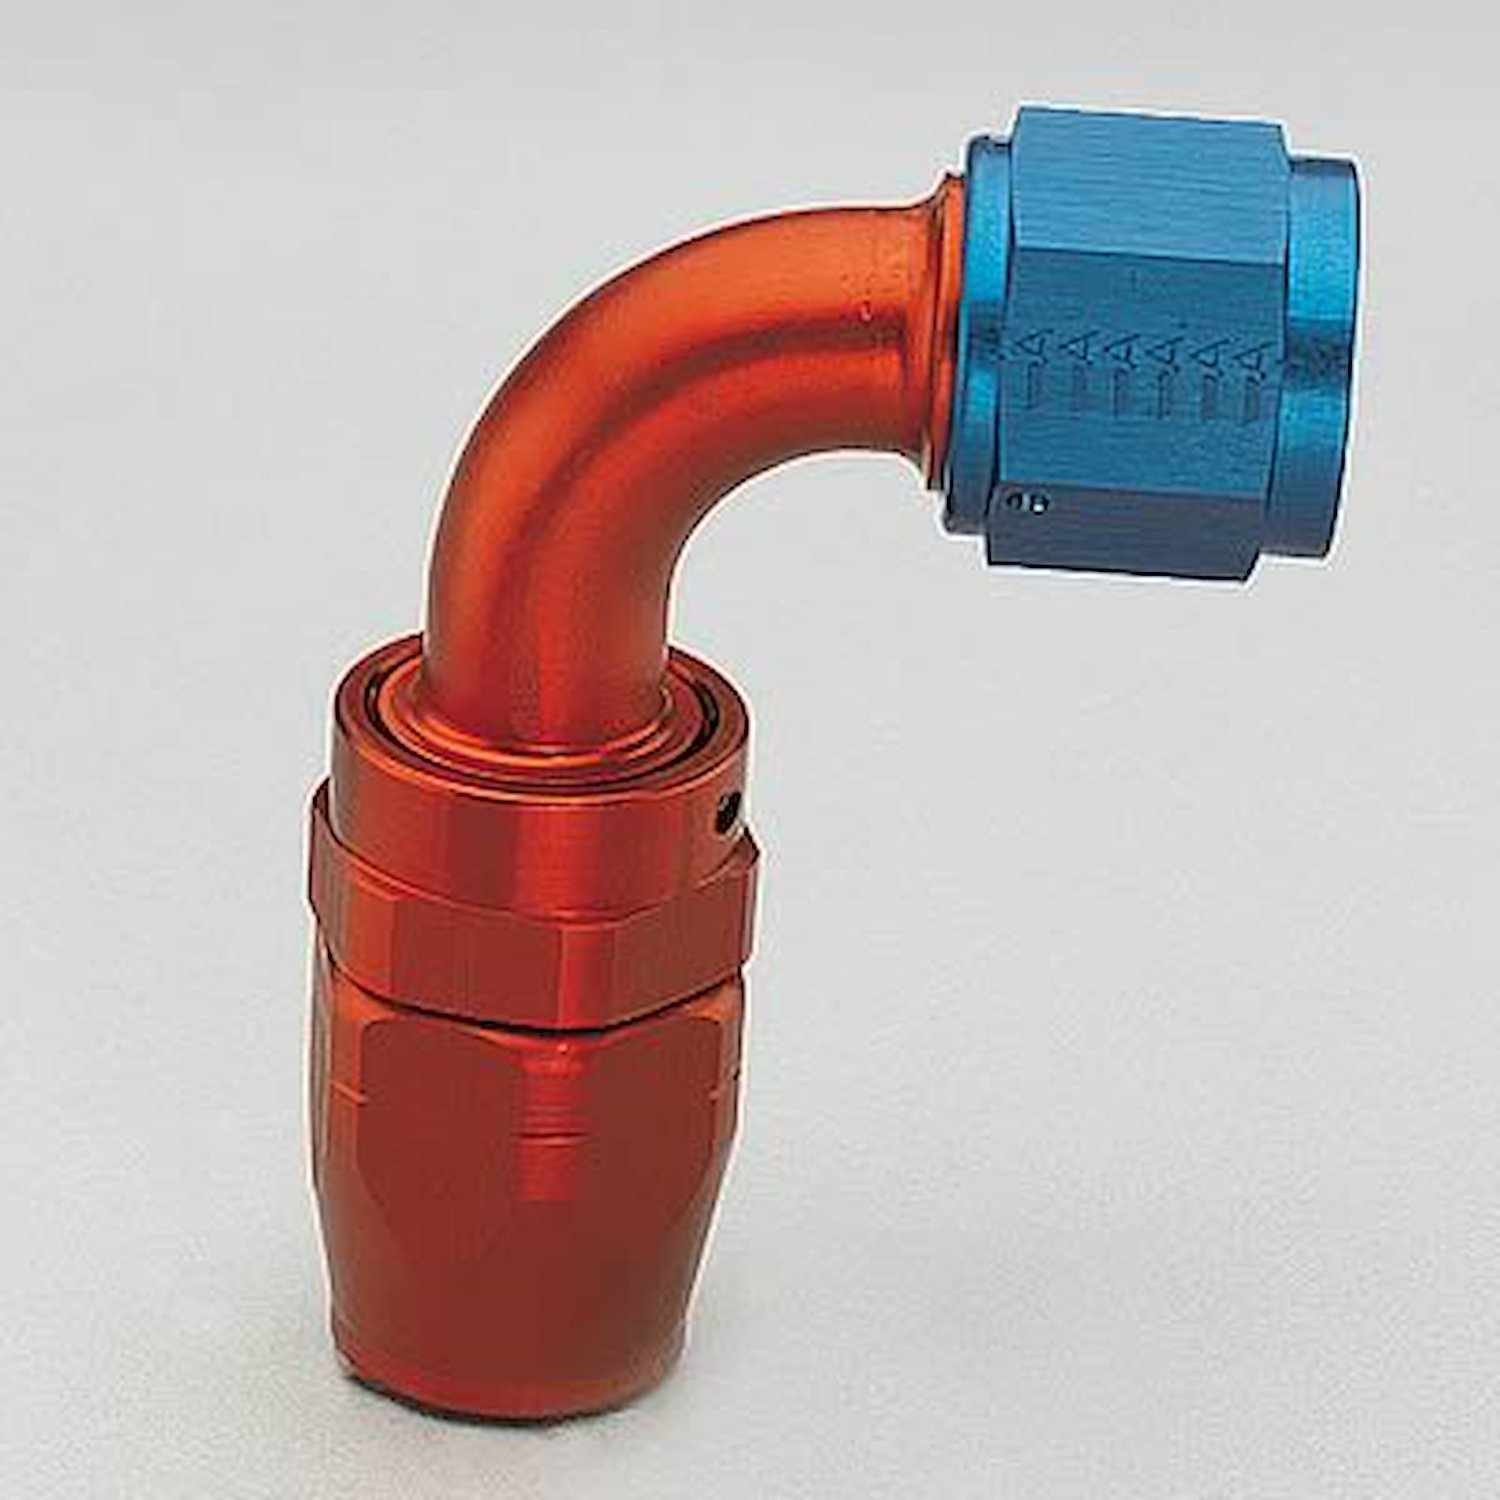 Aluminum Red/Blue Anodized Fitting -10AN Hose Size